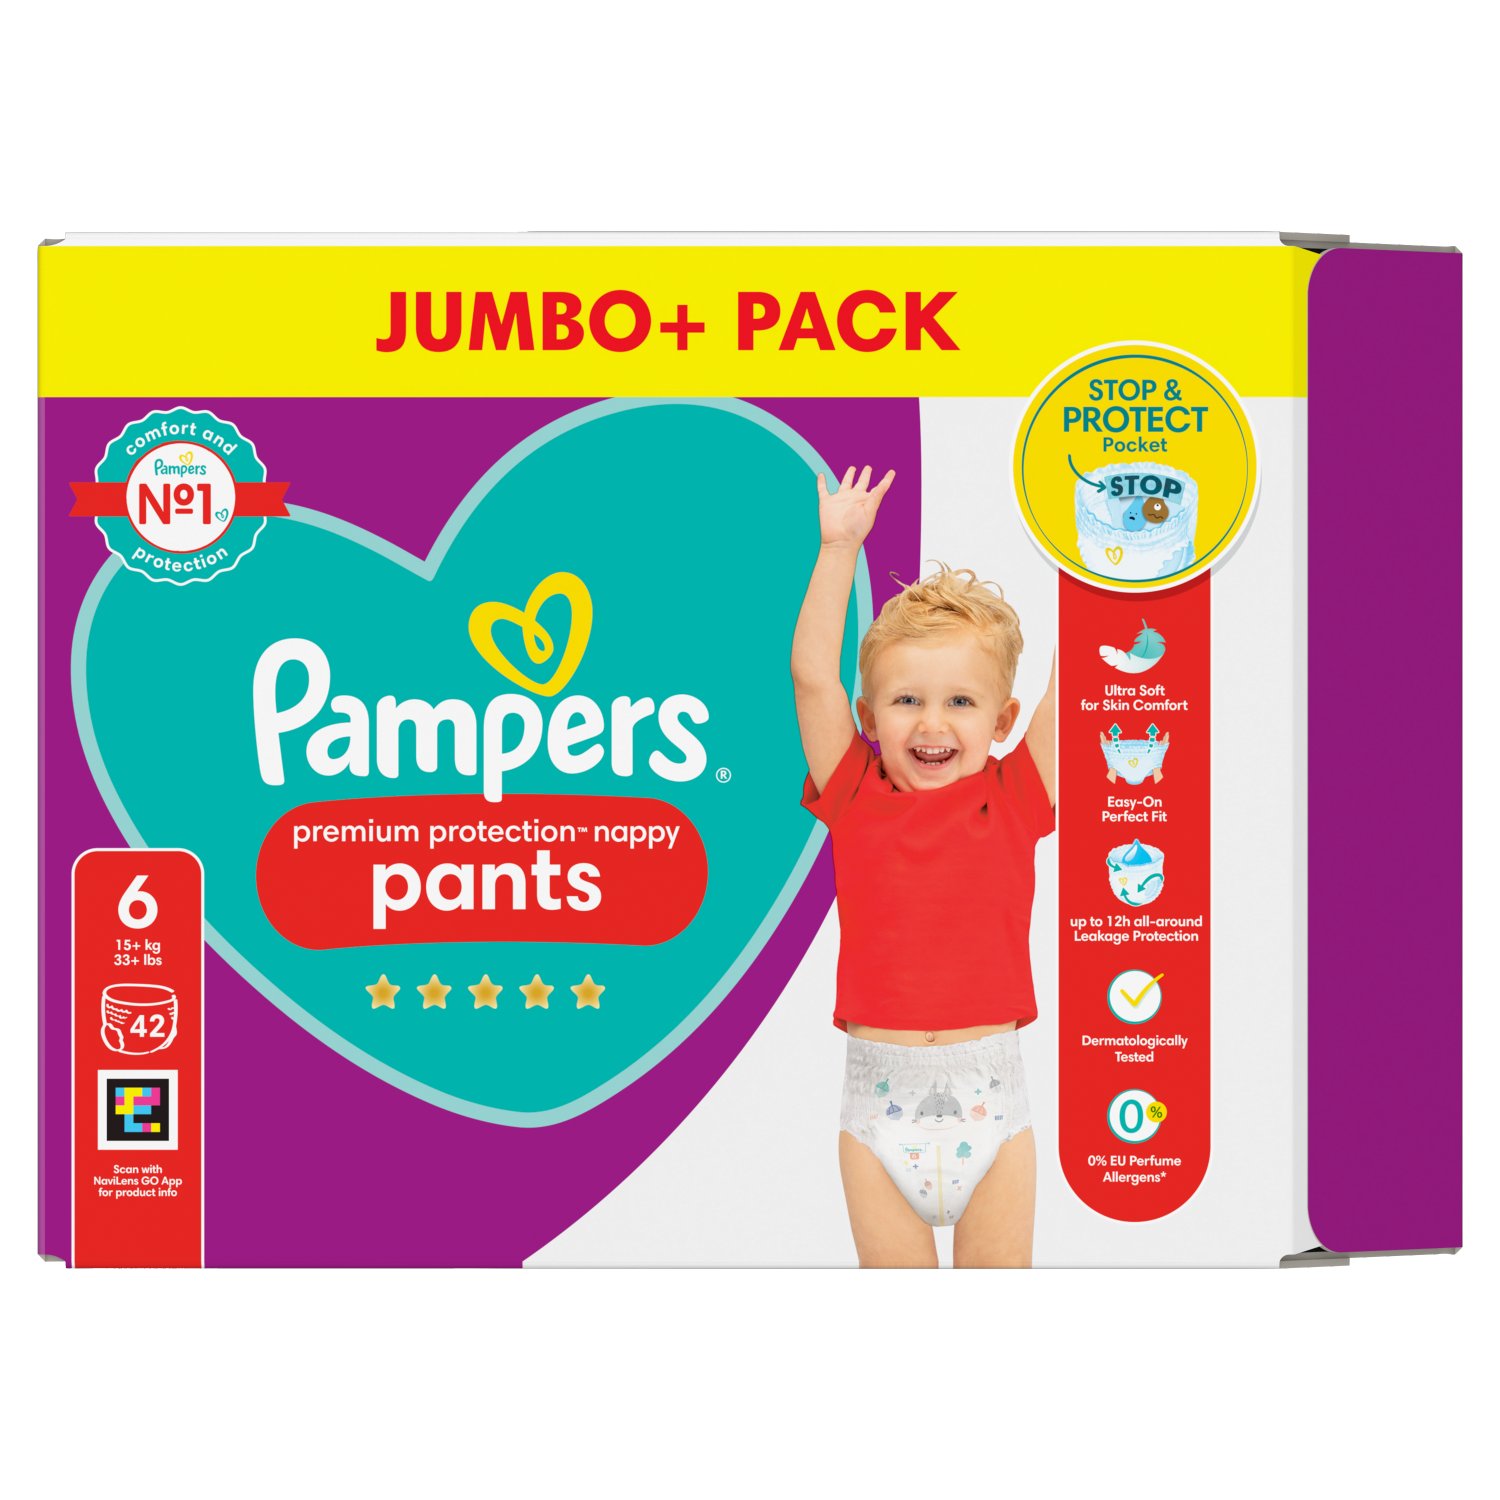 Pampers Premium Protection Nappy Pants Size 6 Nappies (42 Piece)